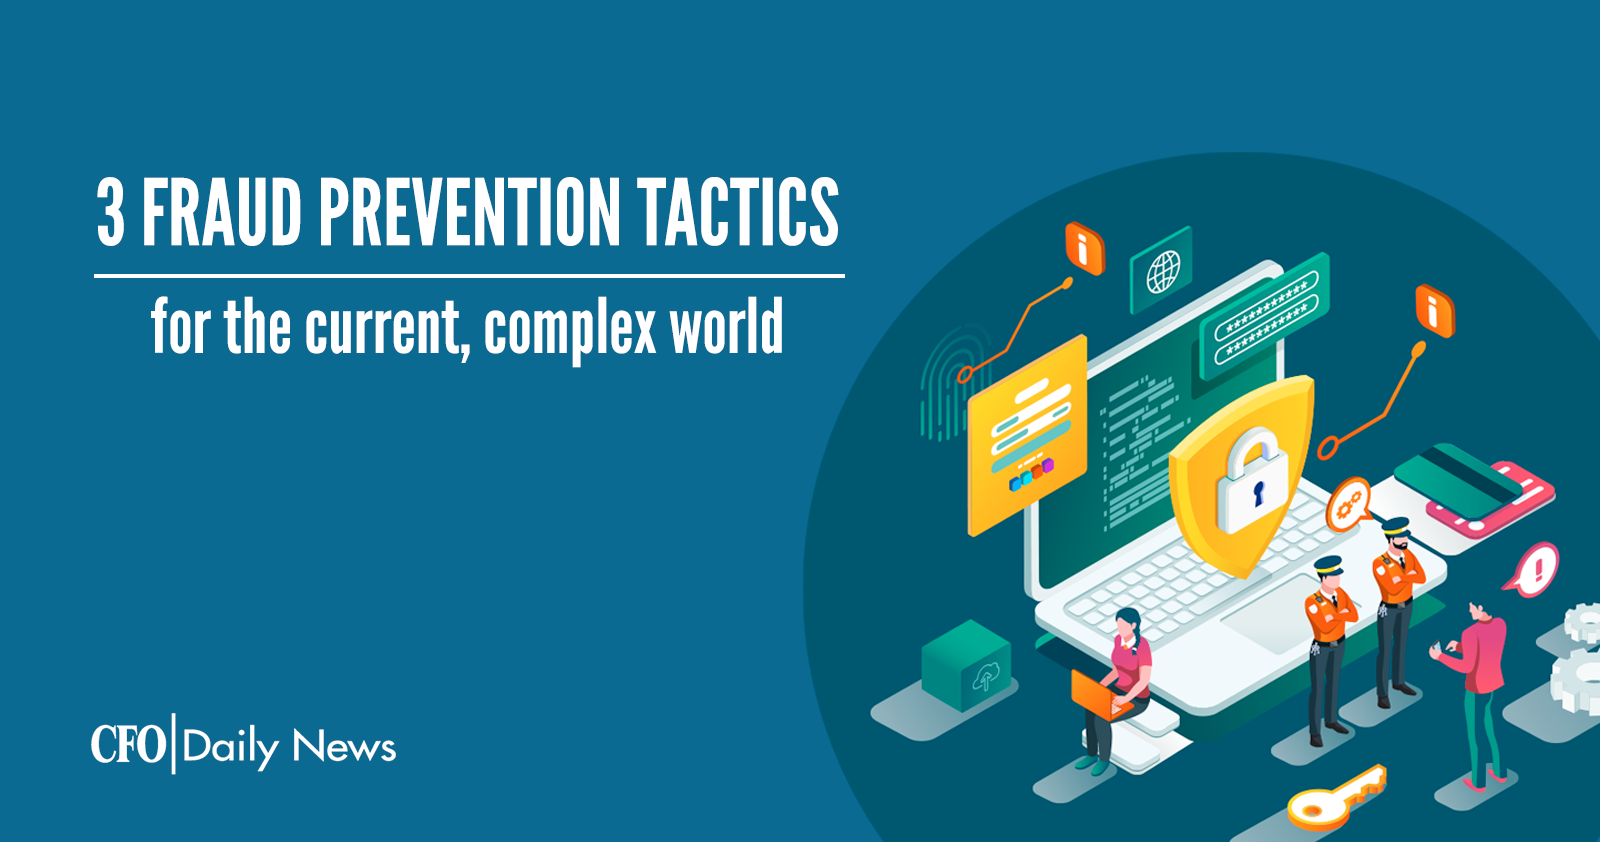 3 fraud prevention tactics for the current complex world